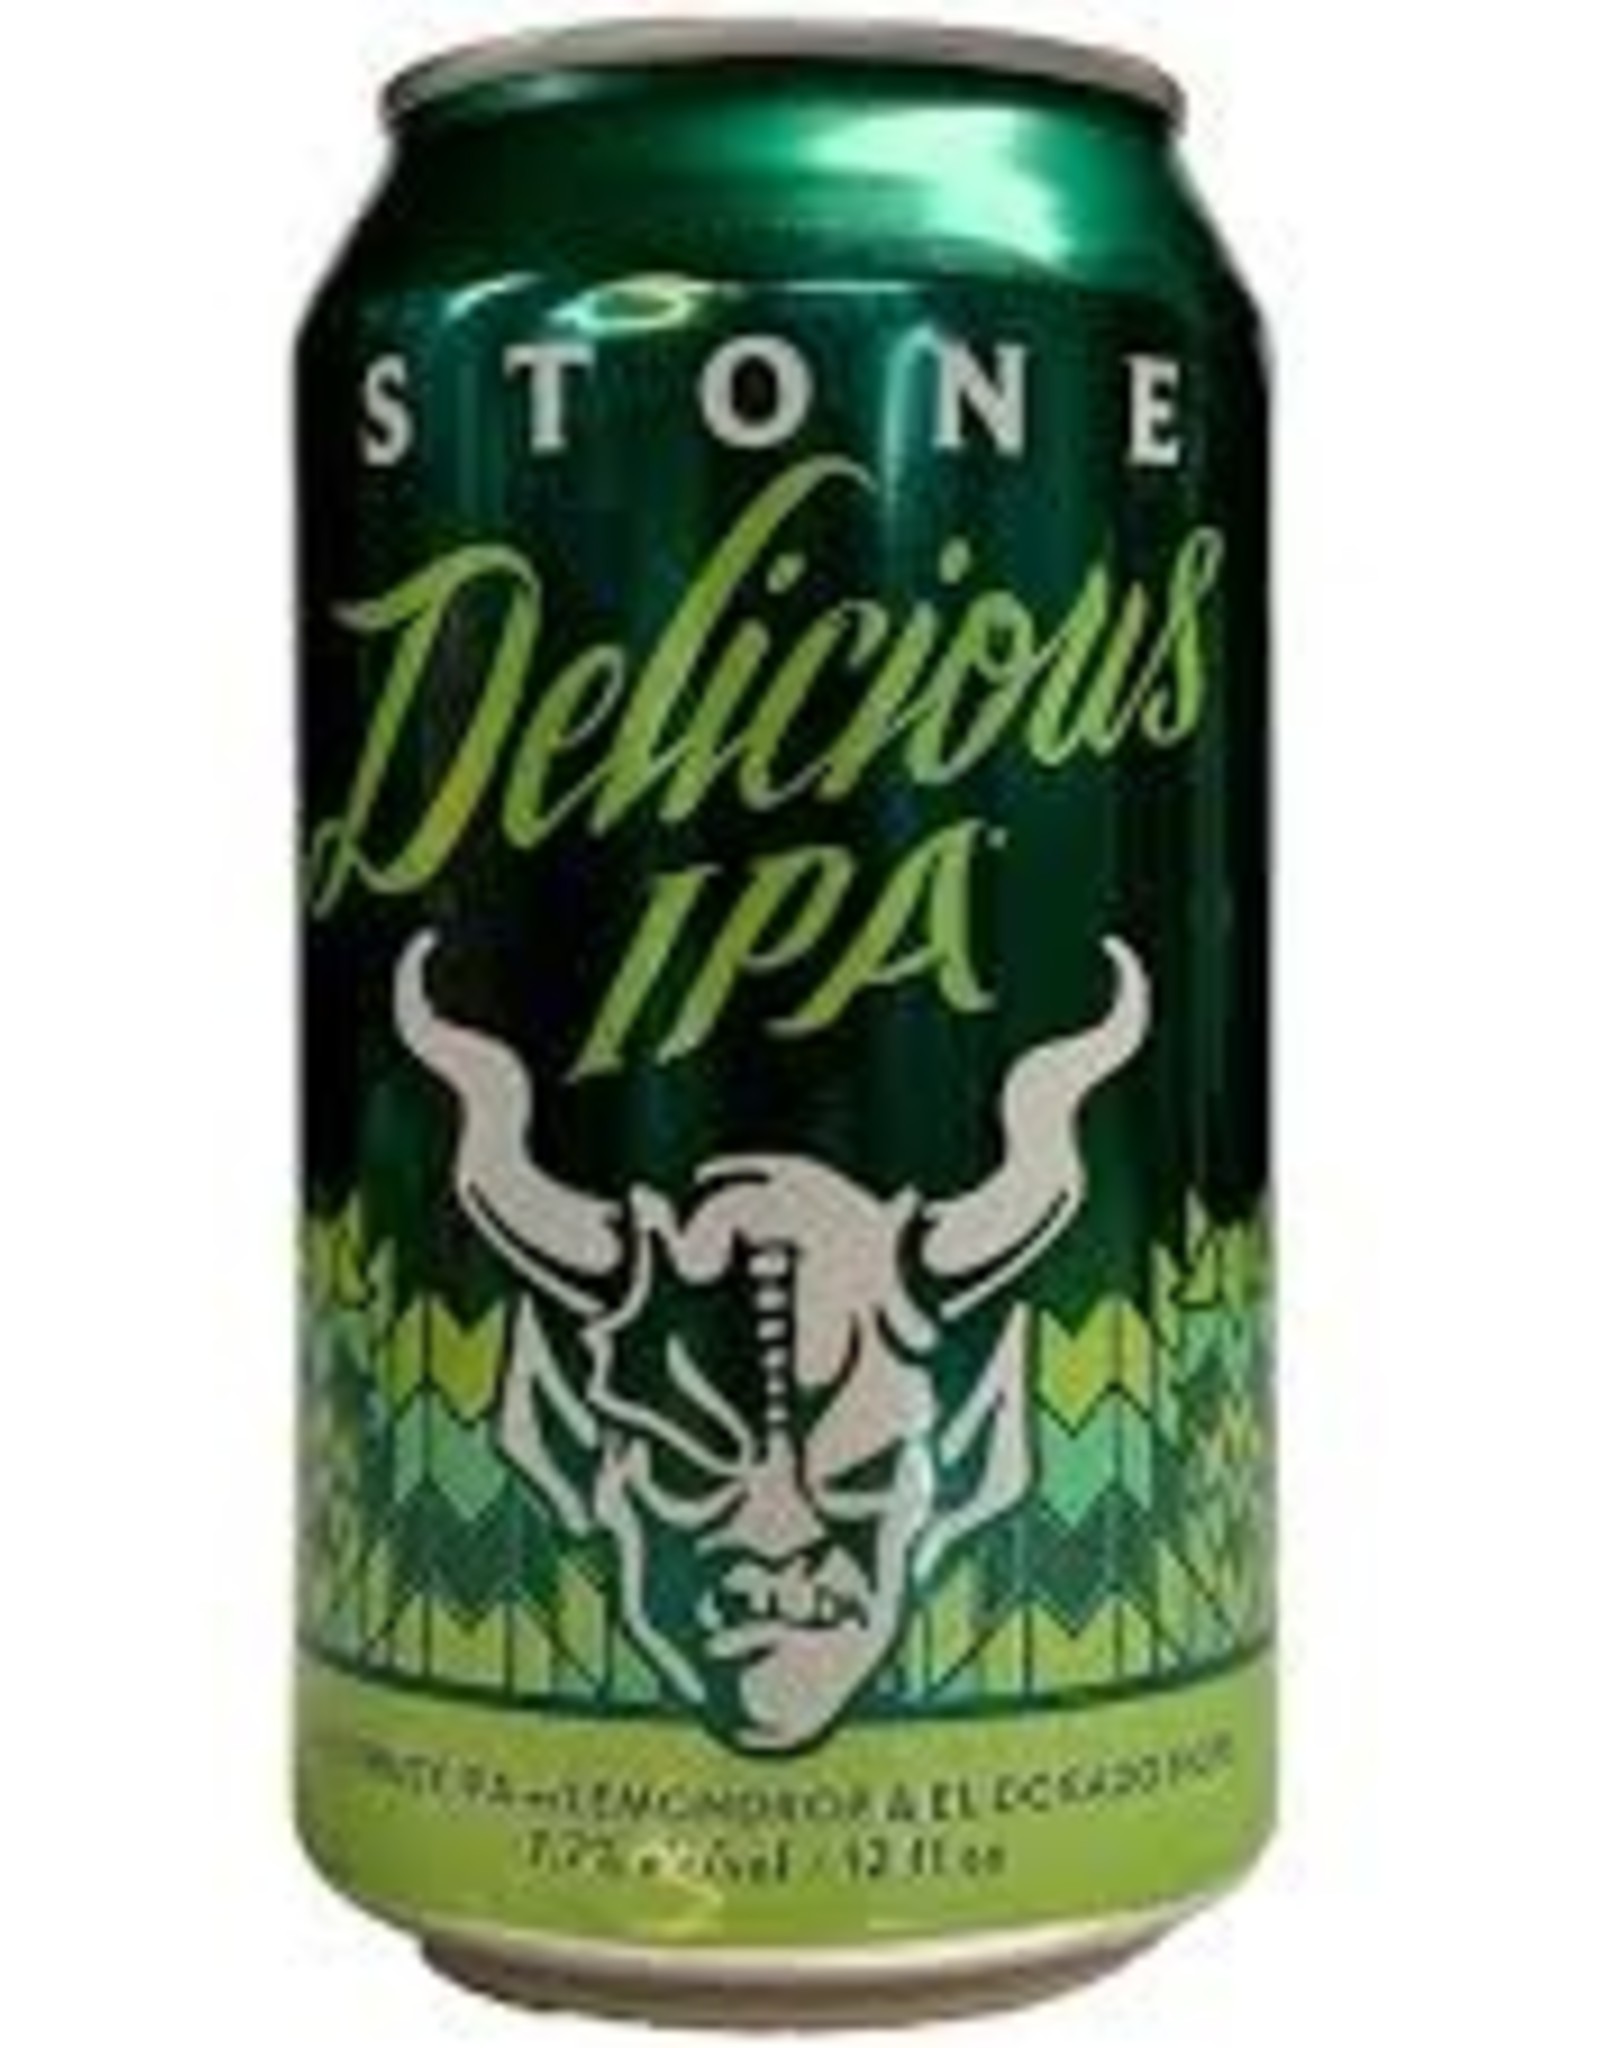 Stone Delicious IPA 6x12 oz cans